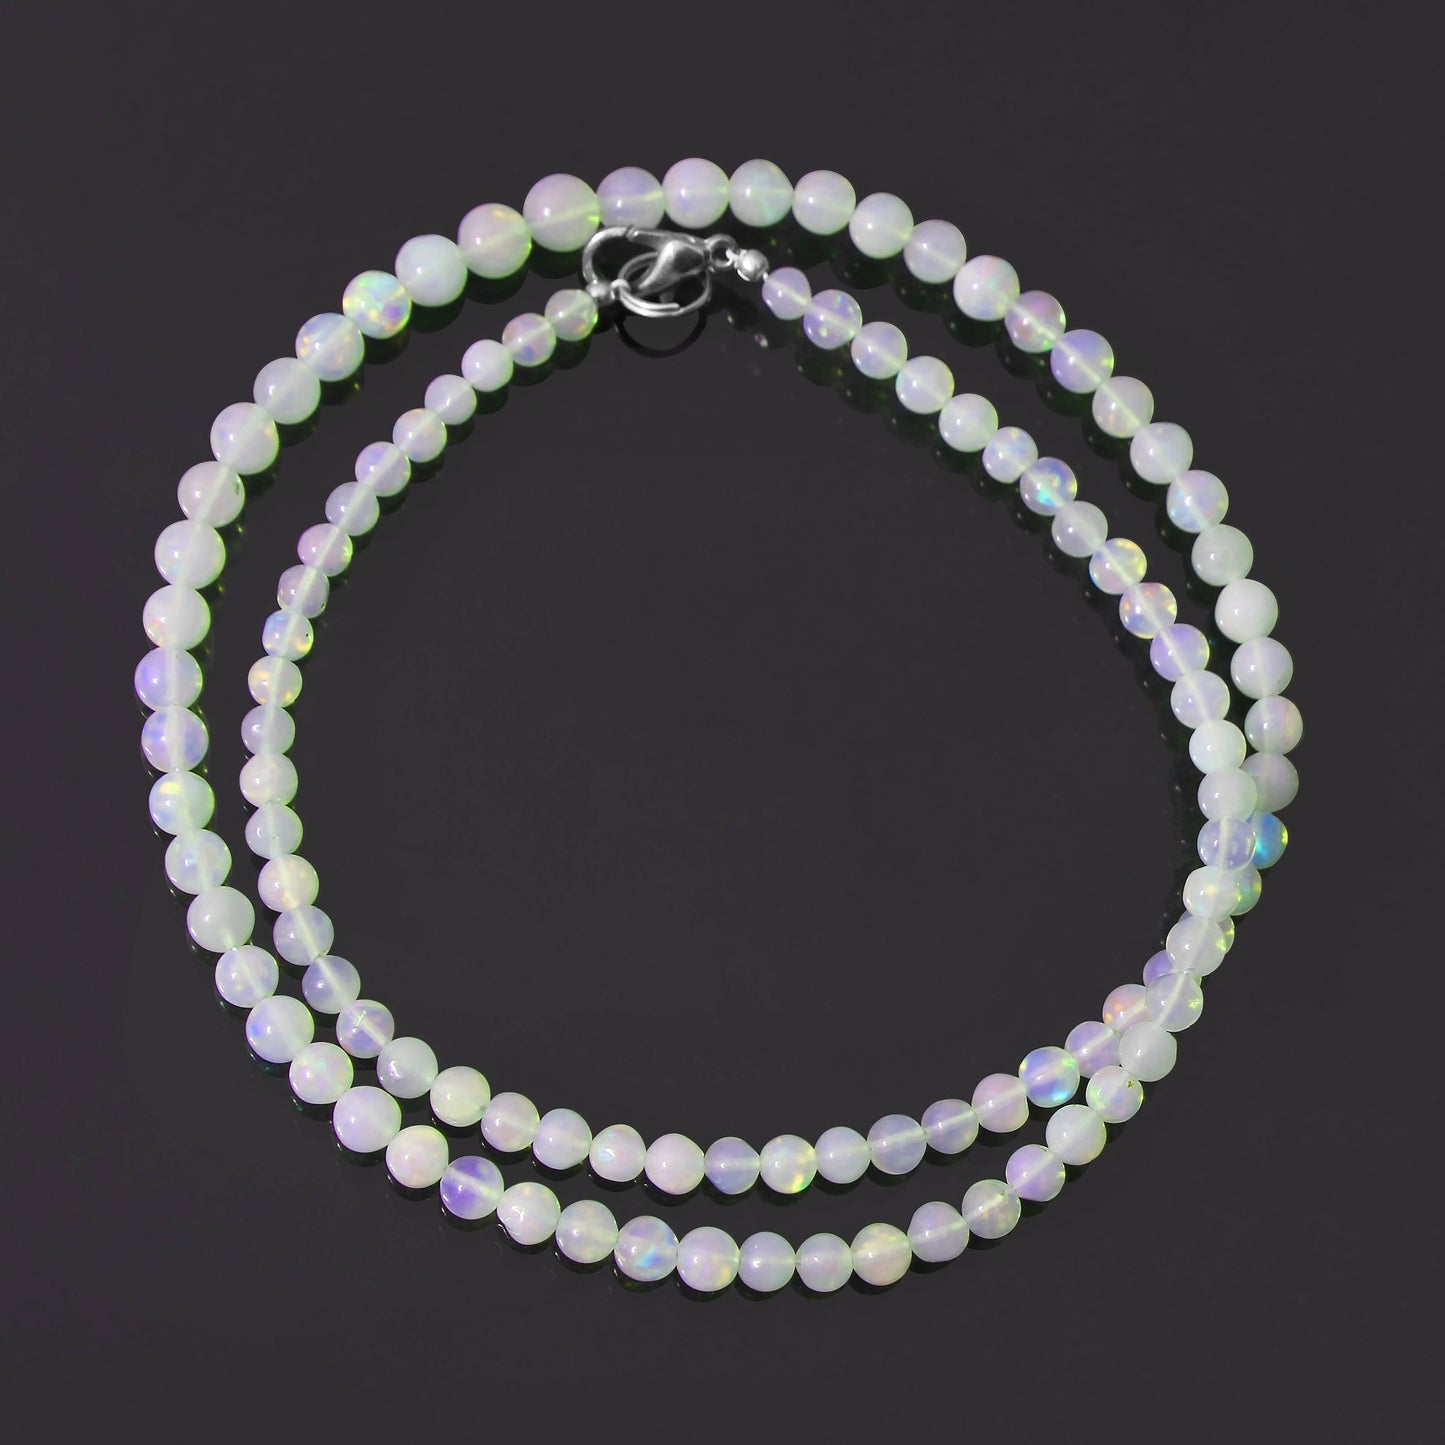 Natural Ethiopian Opal Beaded Necklace, Smooth Round Necklace Jewelry Gift For Women .